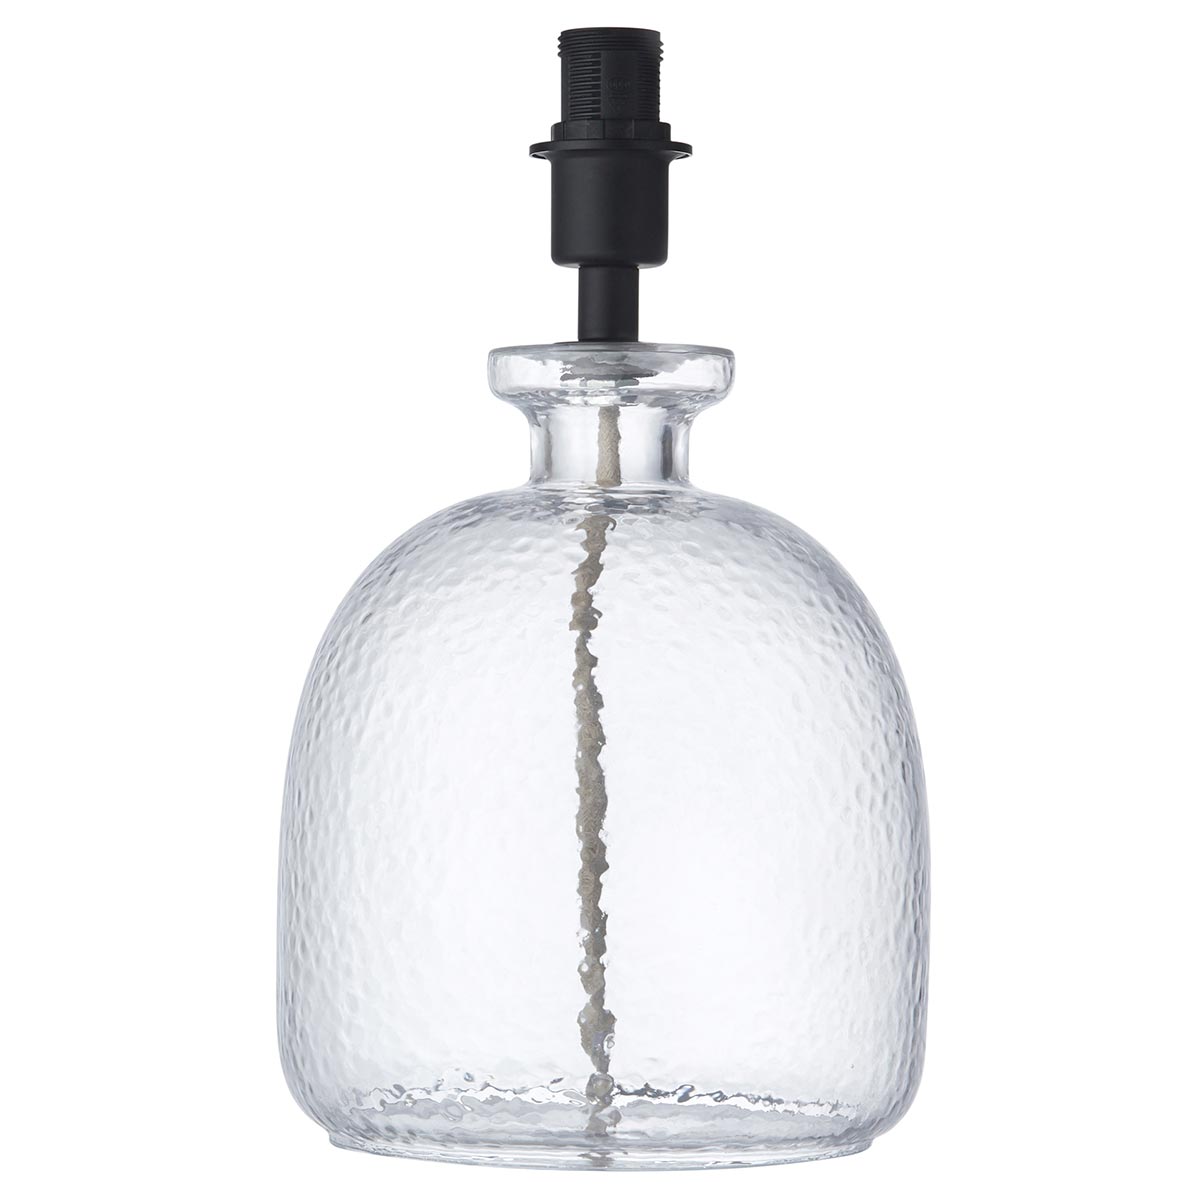 Endon Lyra Classic Textured Glass Table Lamp Base Only